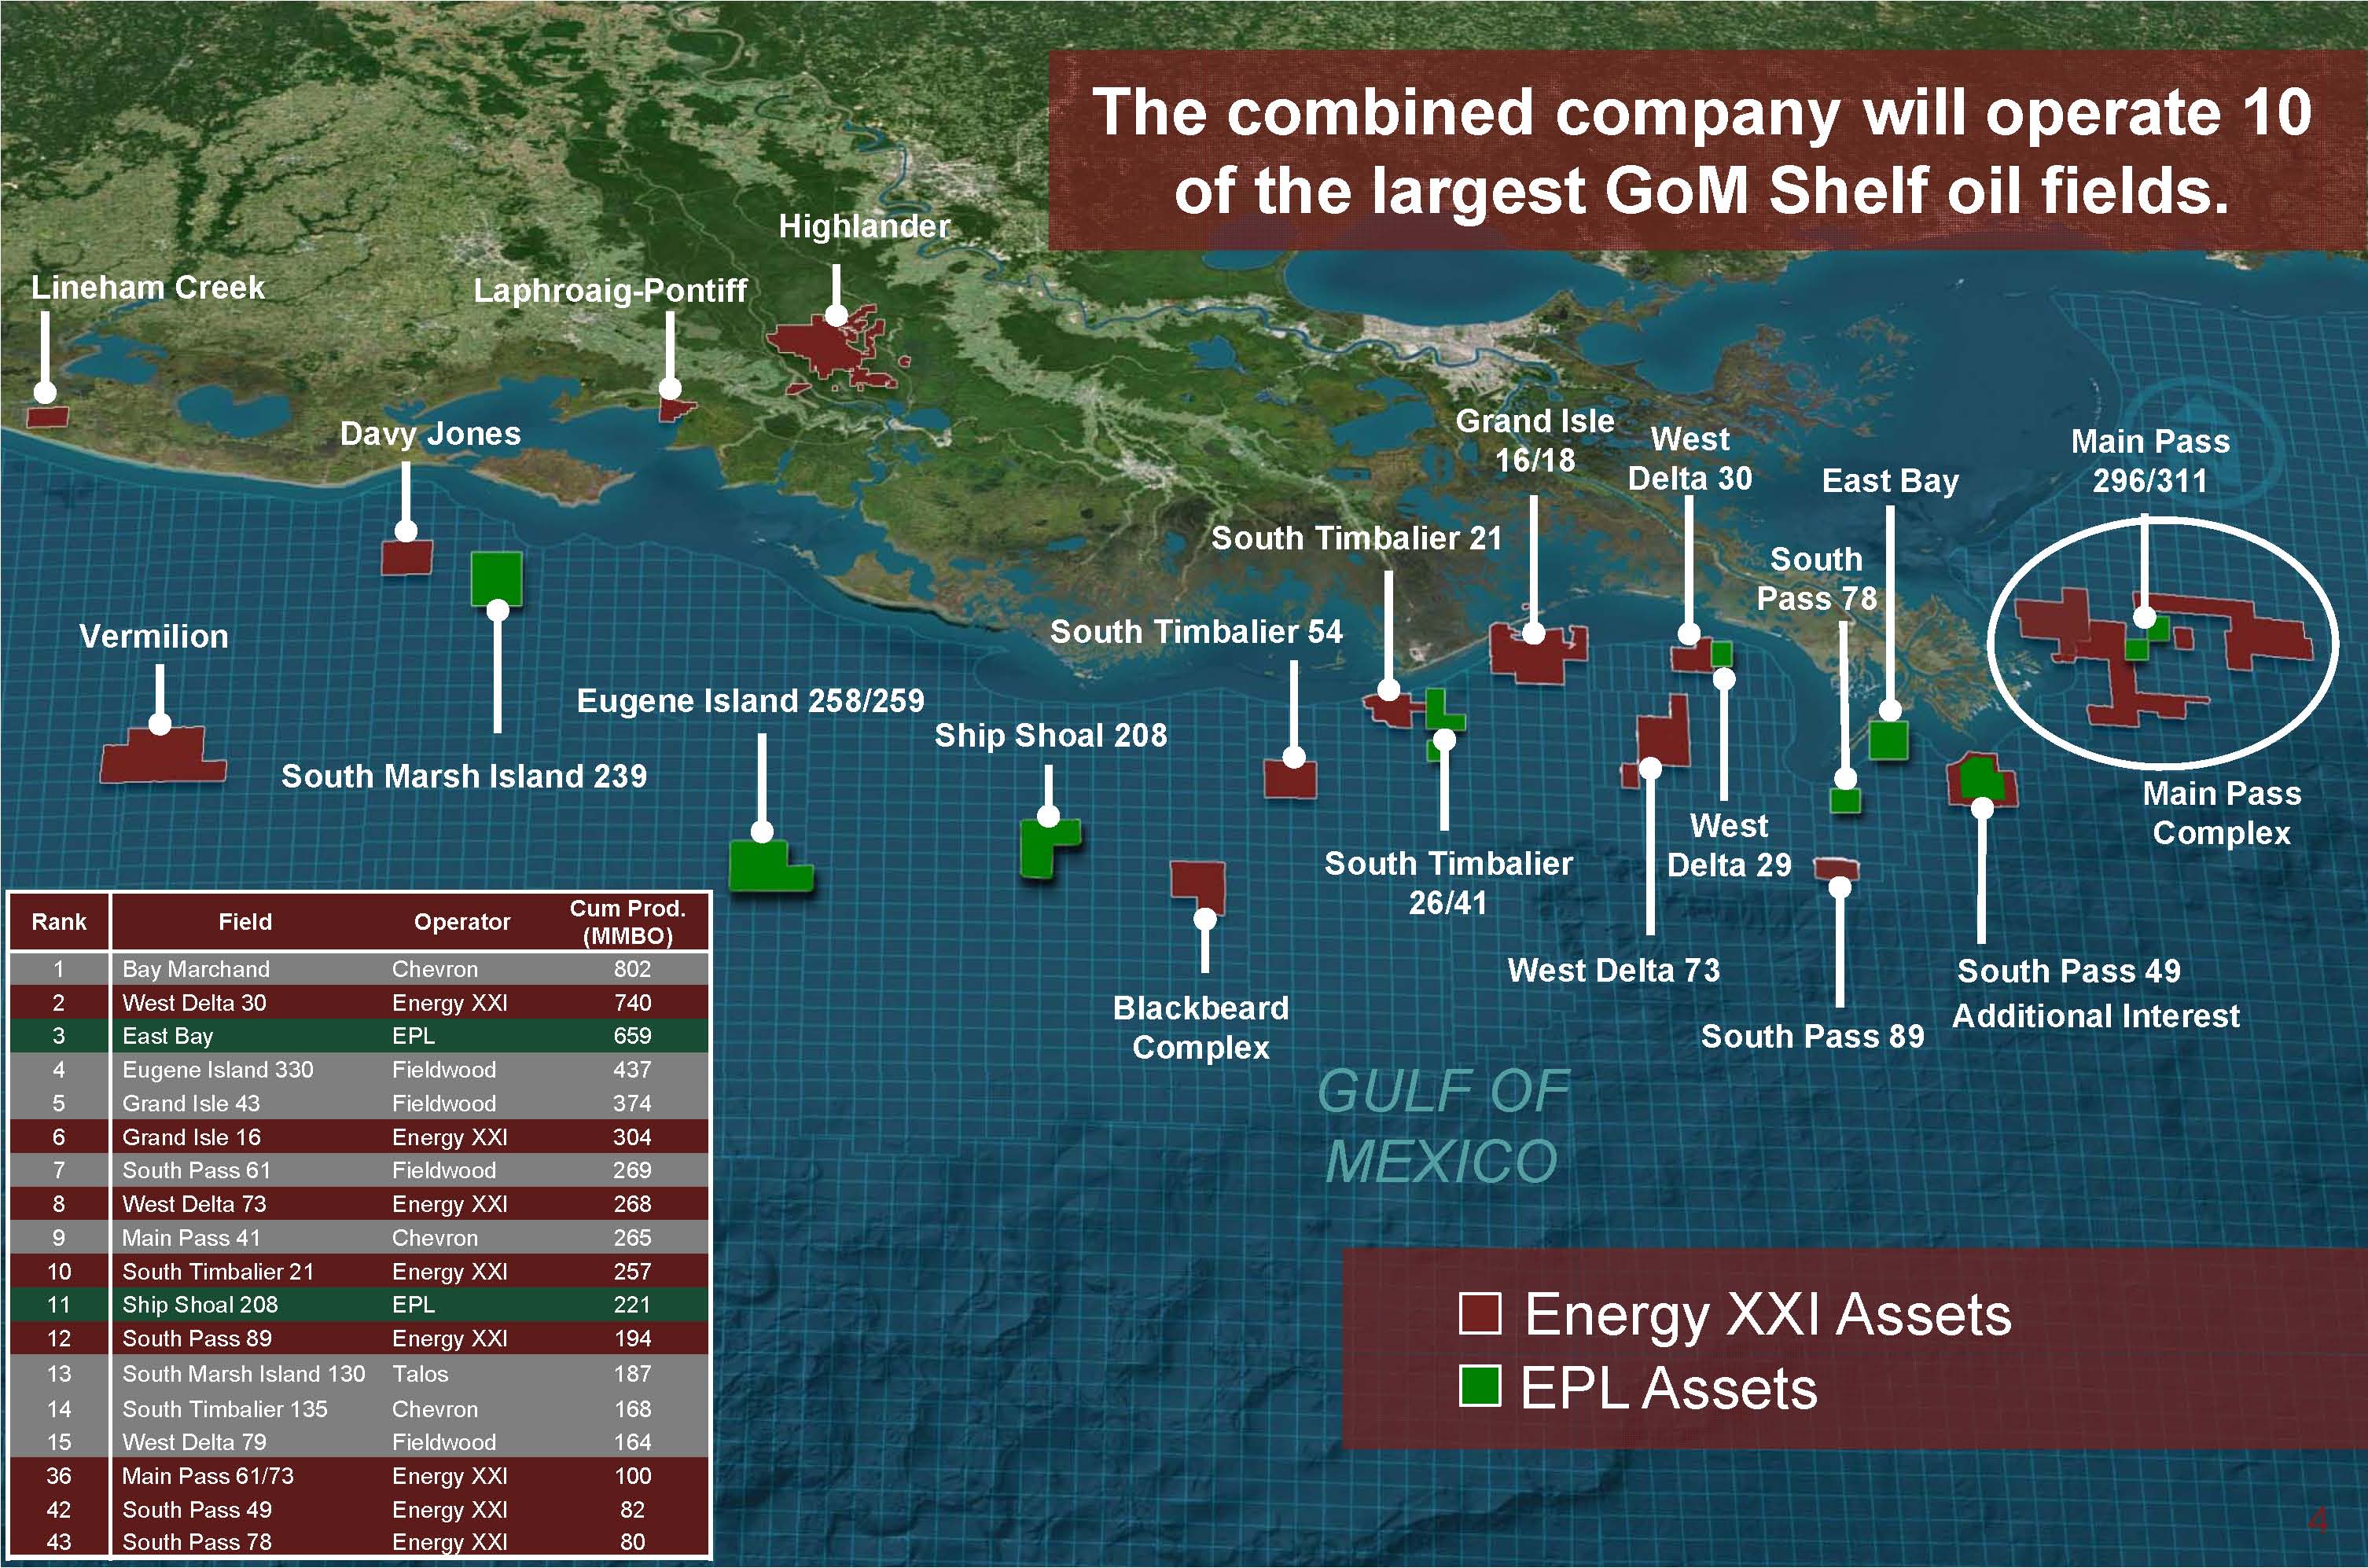 Energy XXI Now the Largest Independent Operating on the GOM Shelf with $2.3B Acquisition of EPL Oil & Gas